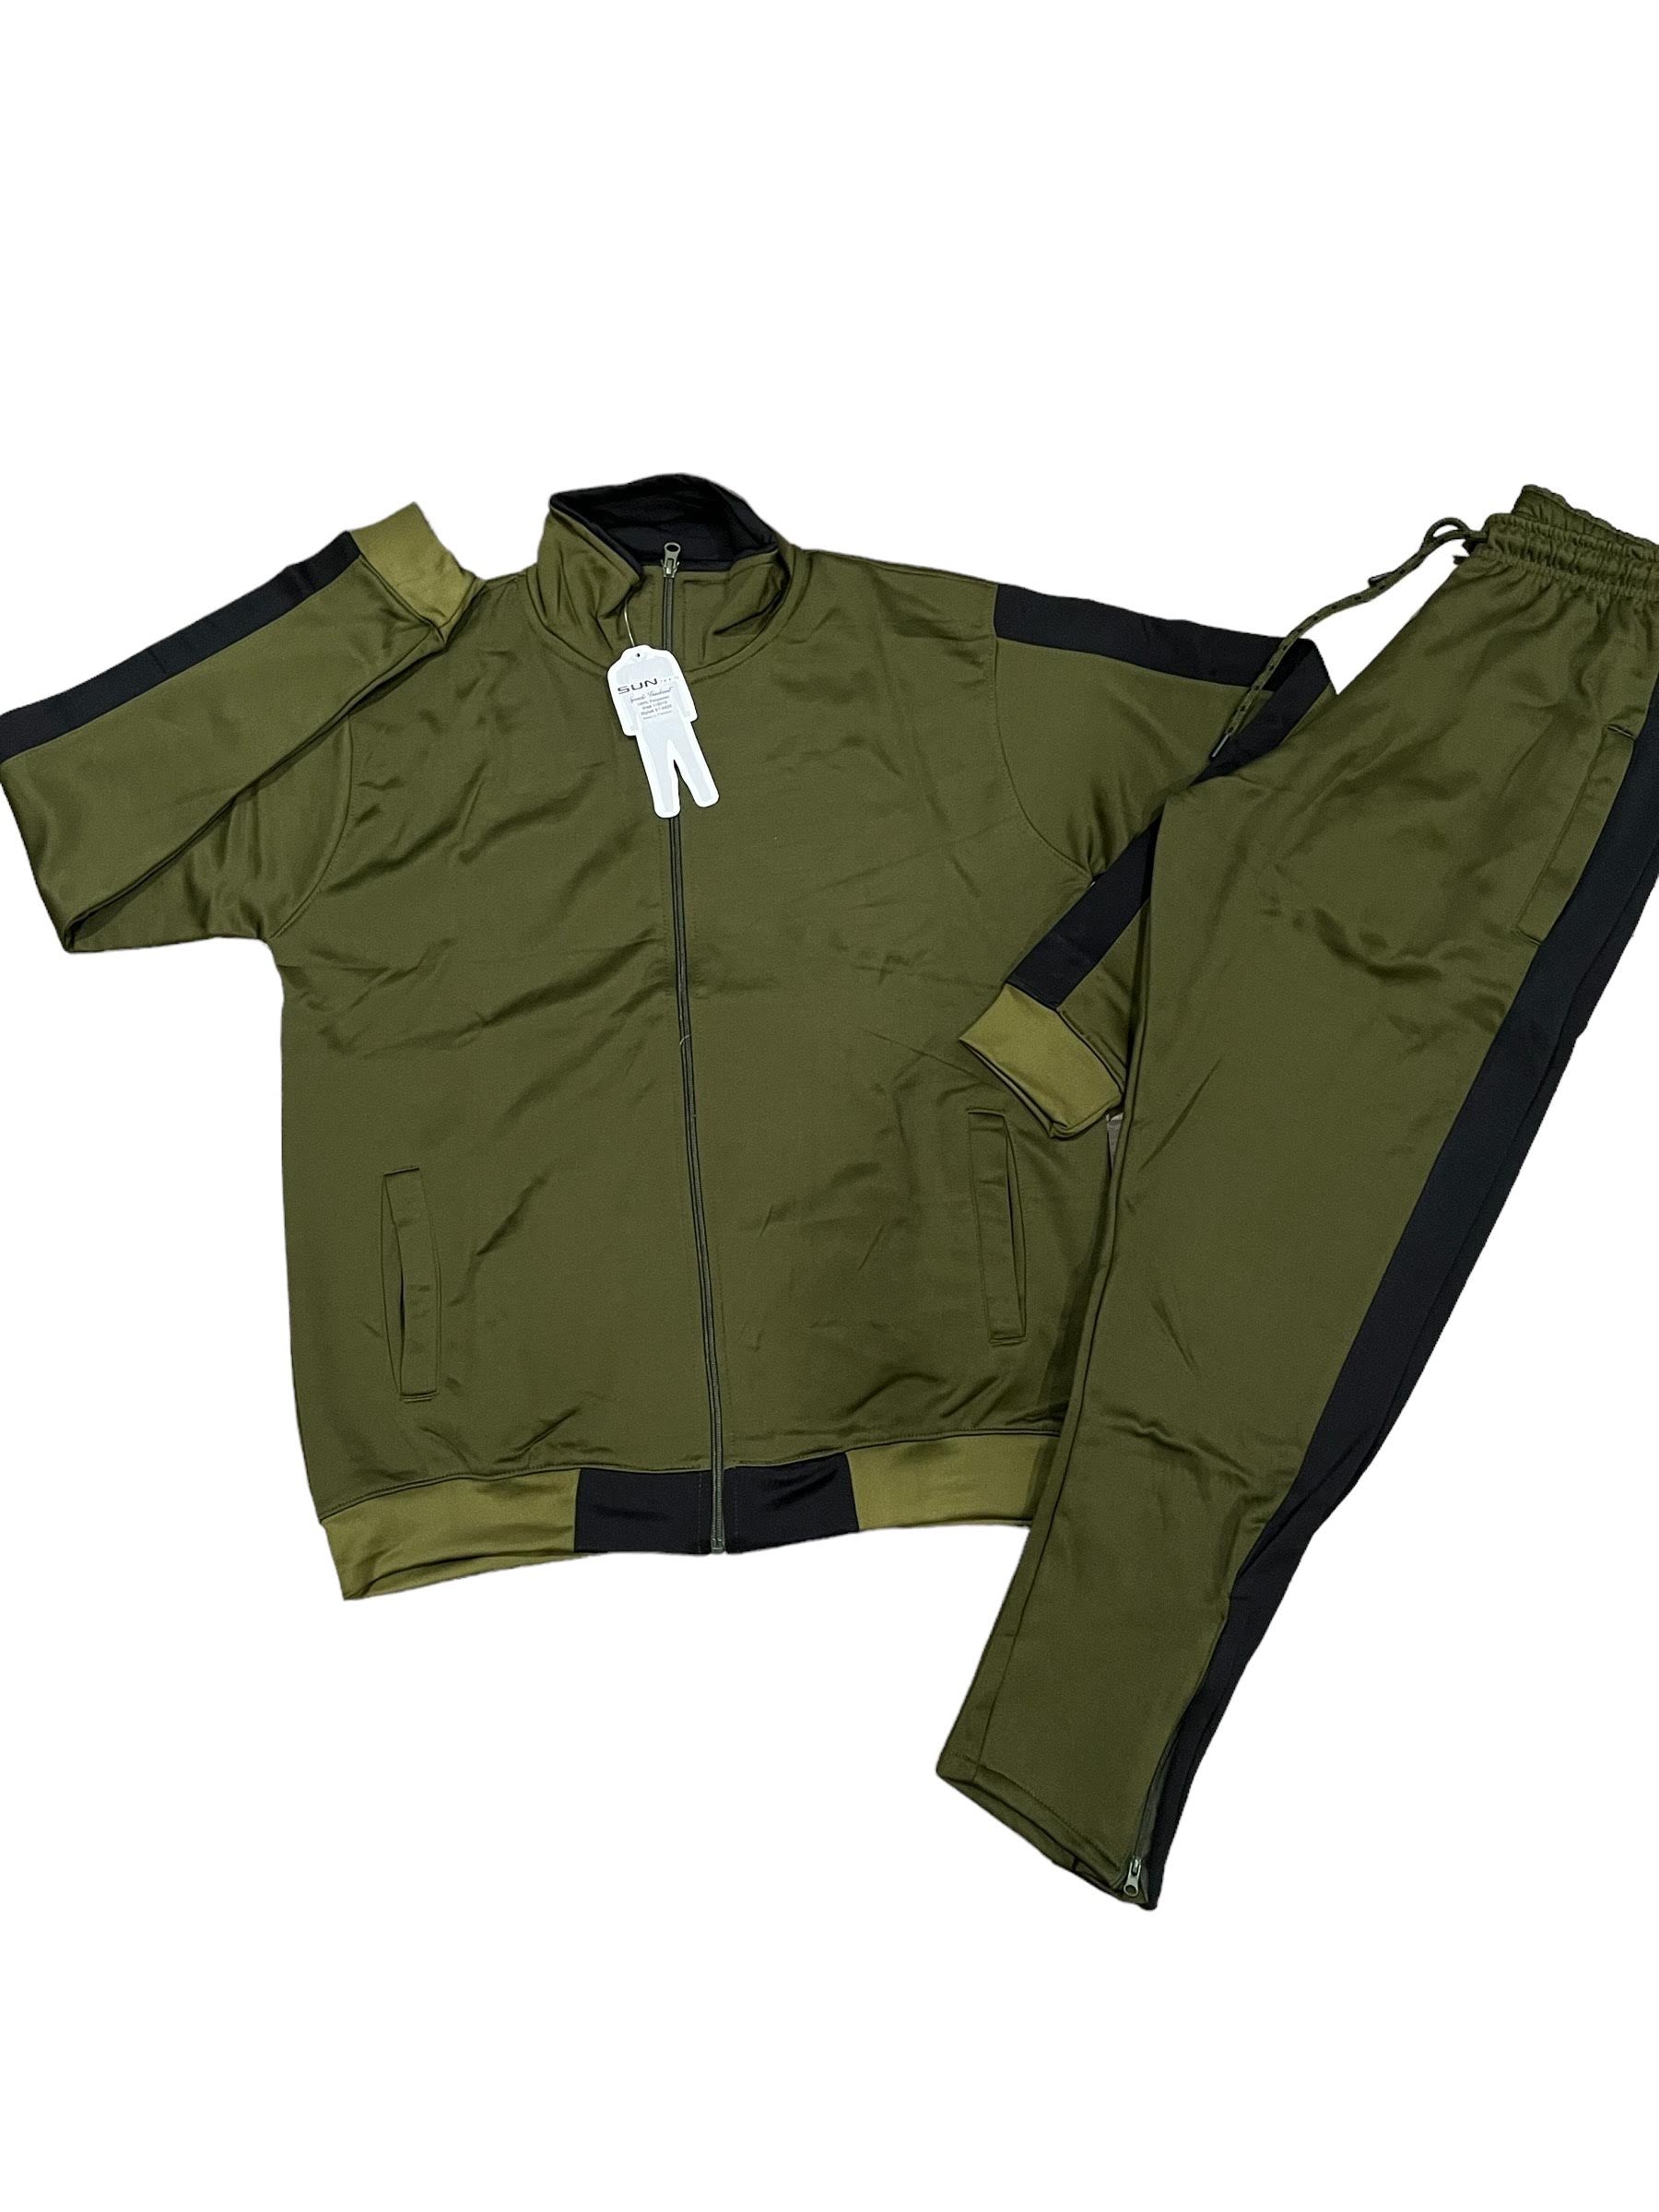 Army Green/ Black tracksuit